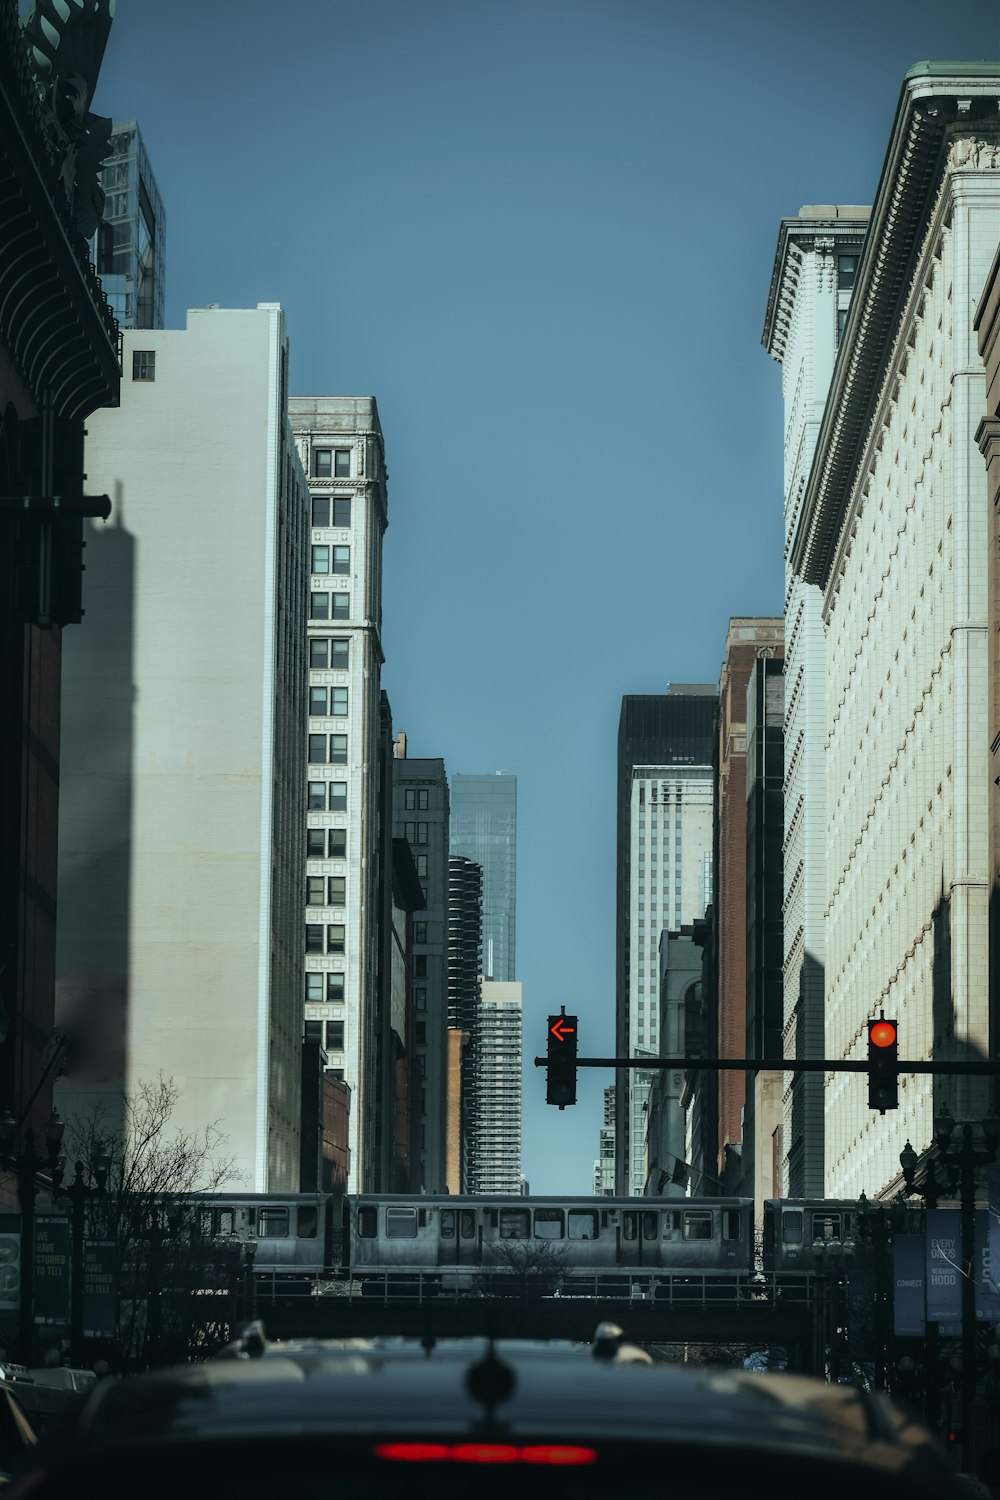 a city street with traffic lights and tall buildings